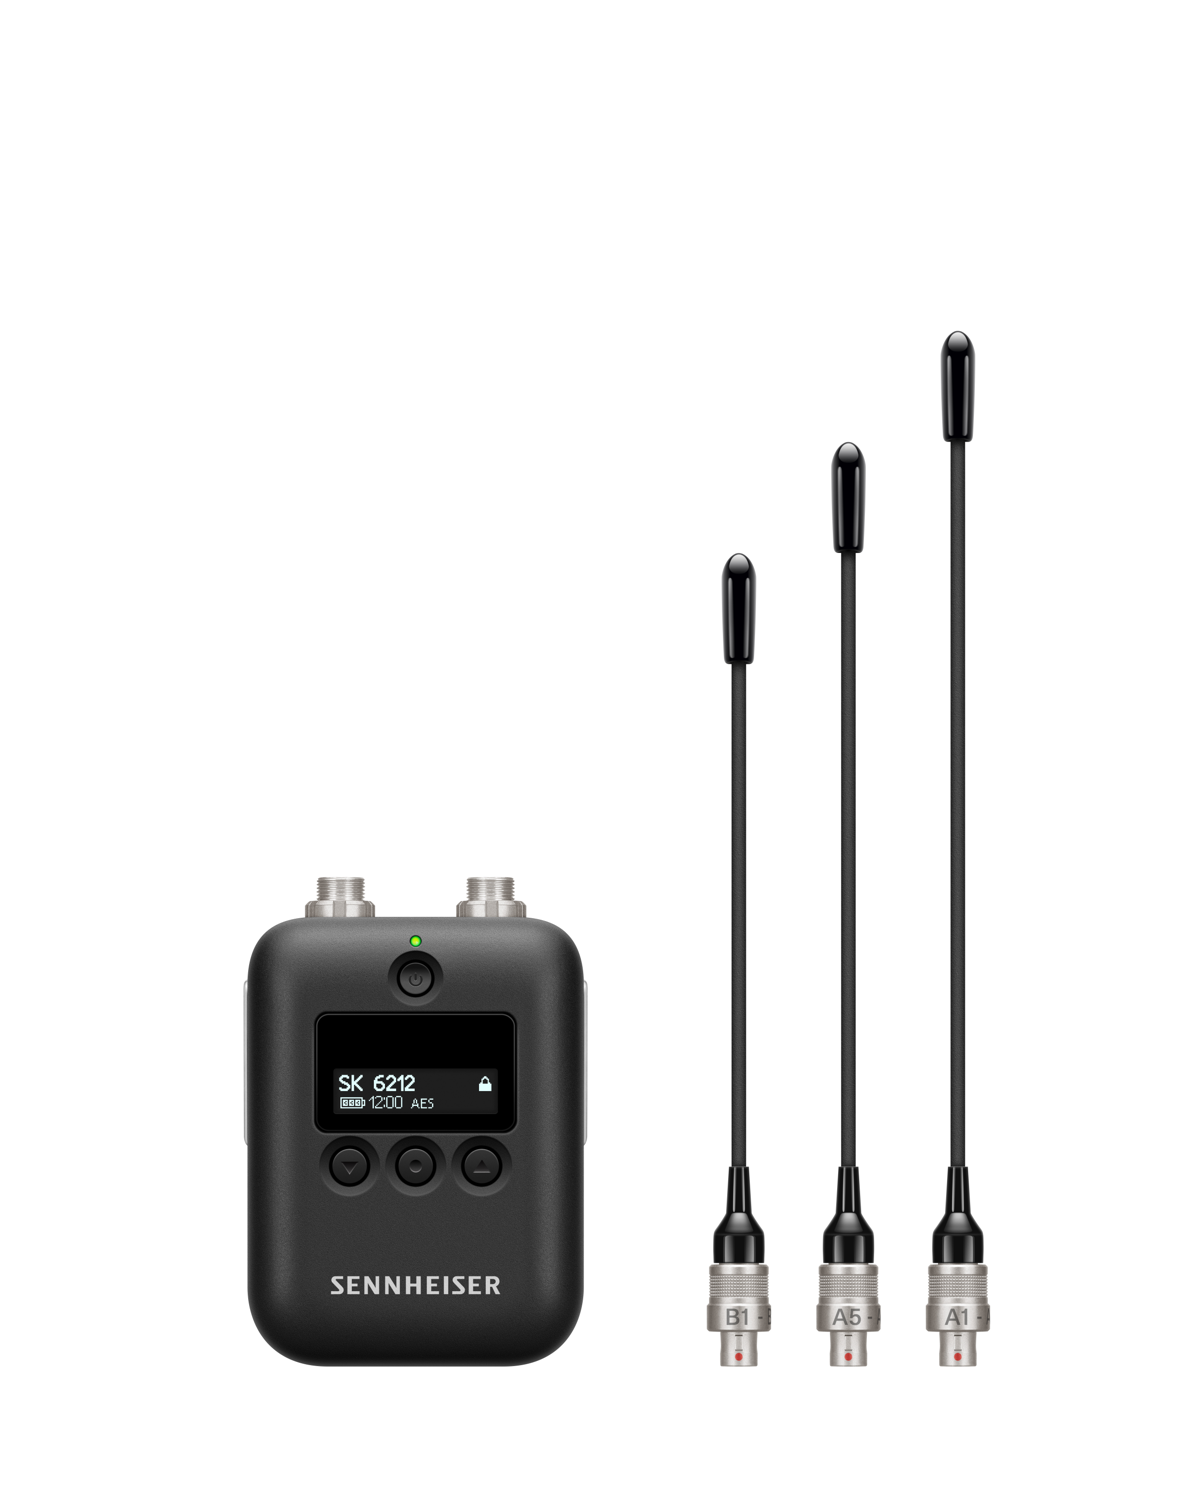 The tiny SK 6212 is the latest addition to Sennheiser’s Digital 6000 series